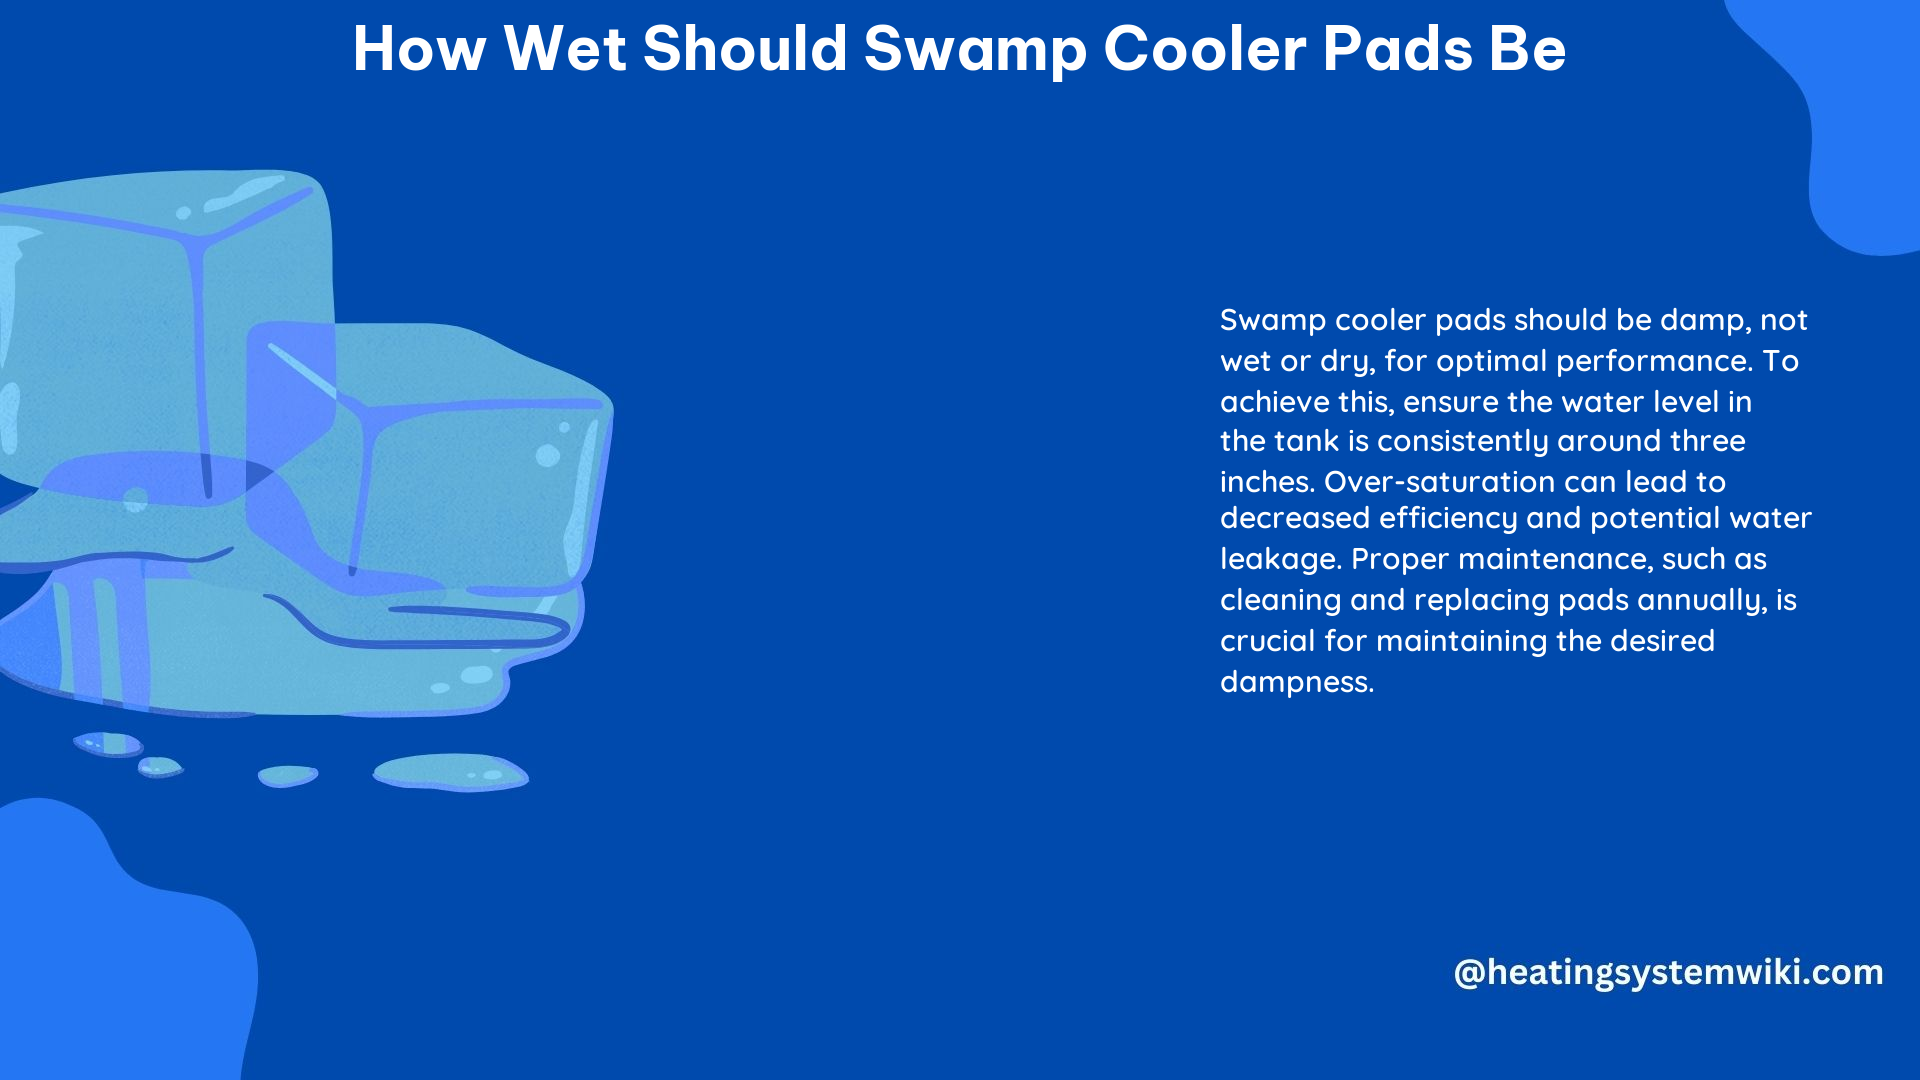 How Wet Should Swamp Cooler Pads Be